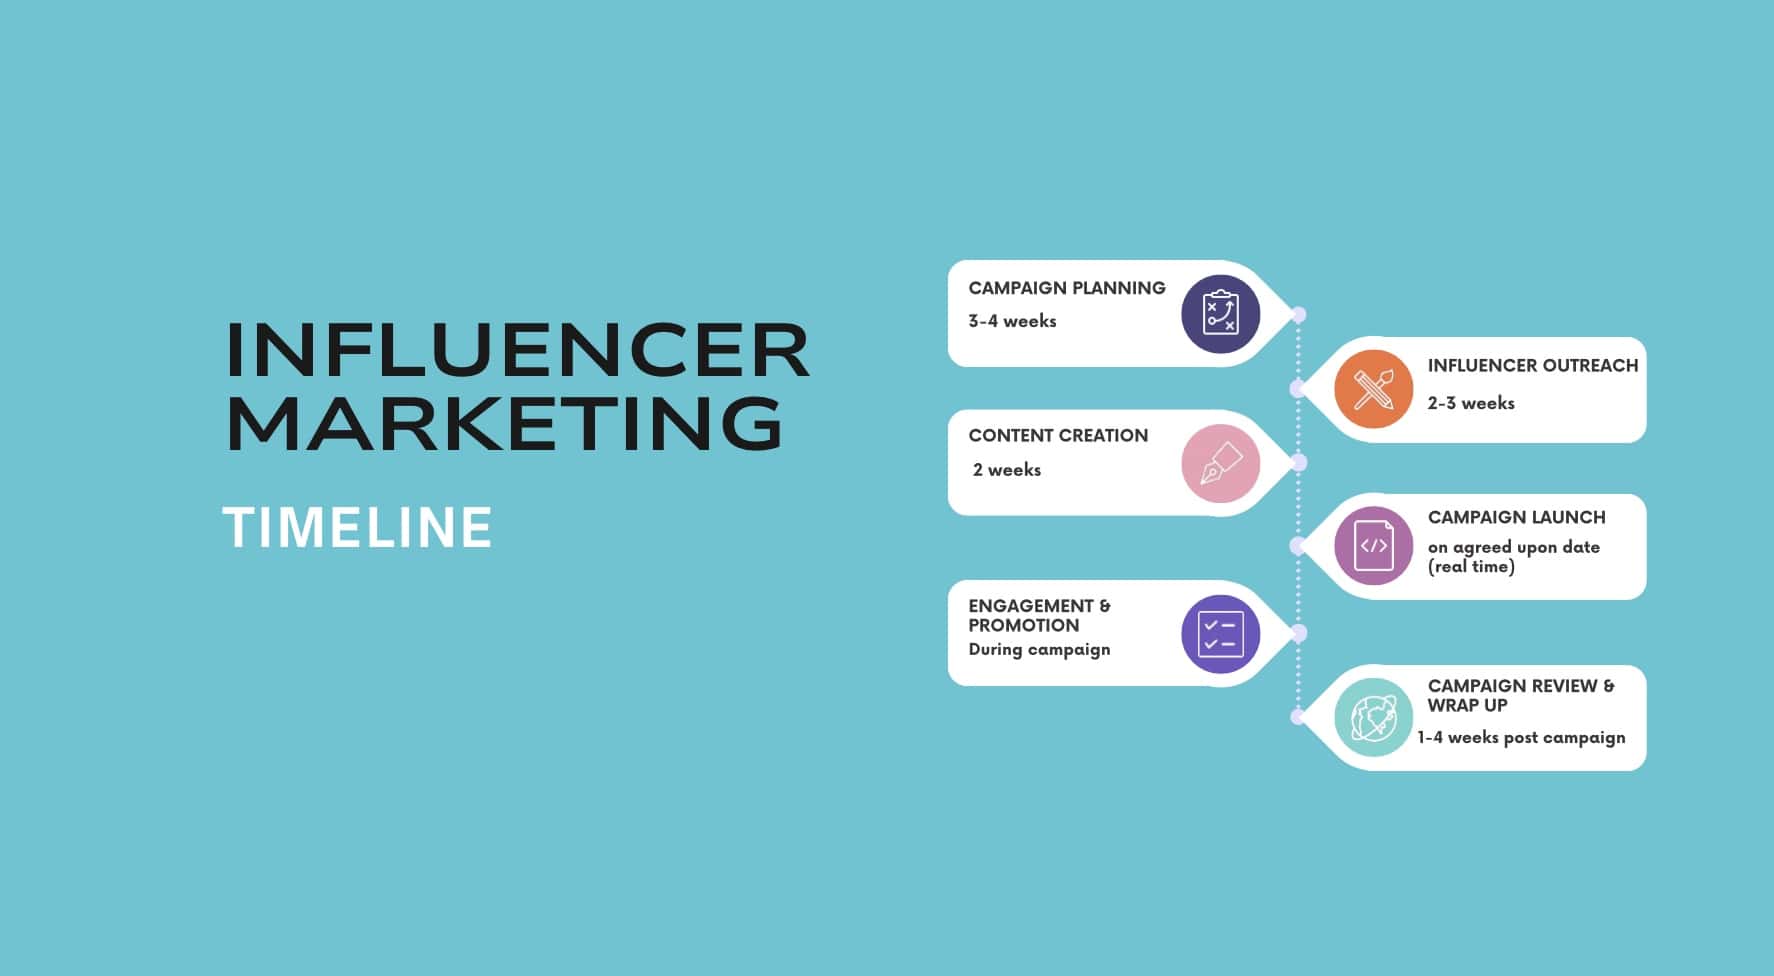 Why an Influencer Marketing Campaign Timeline is essential for